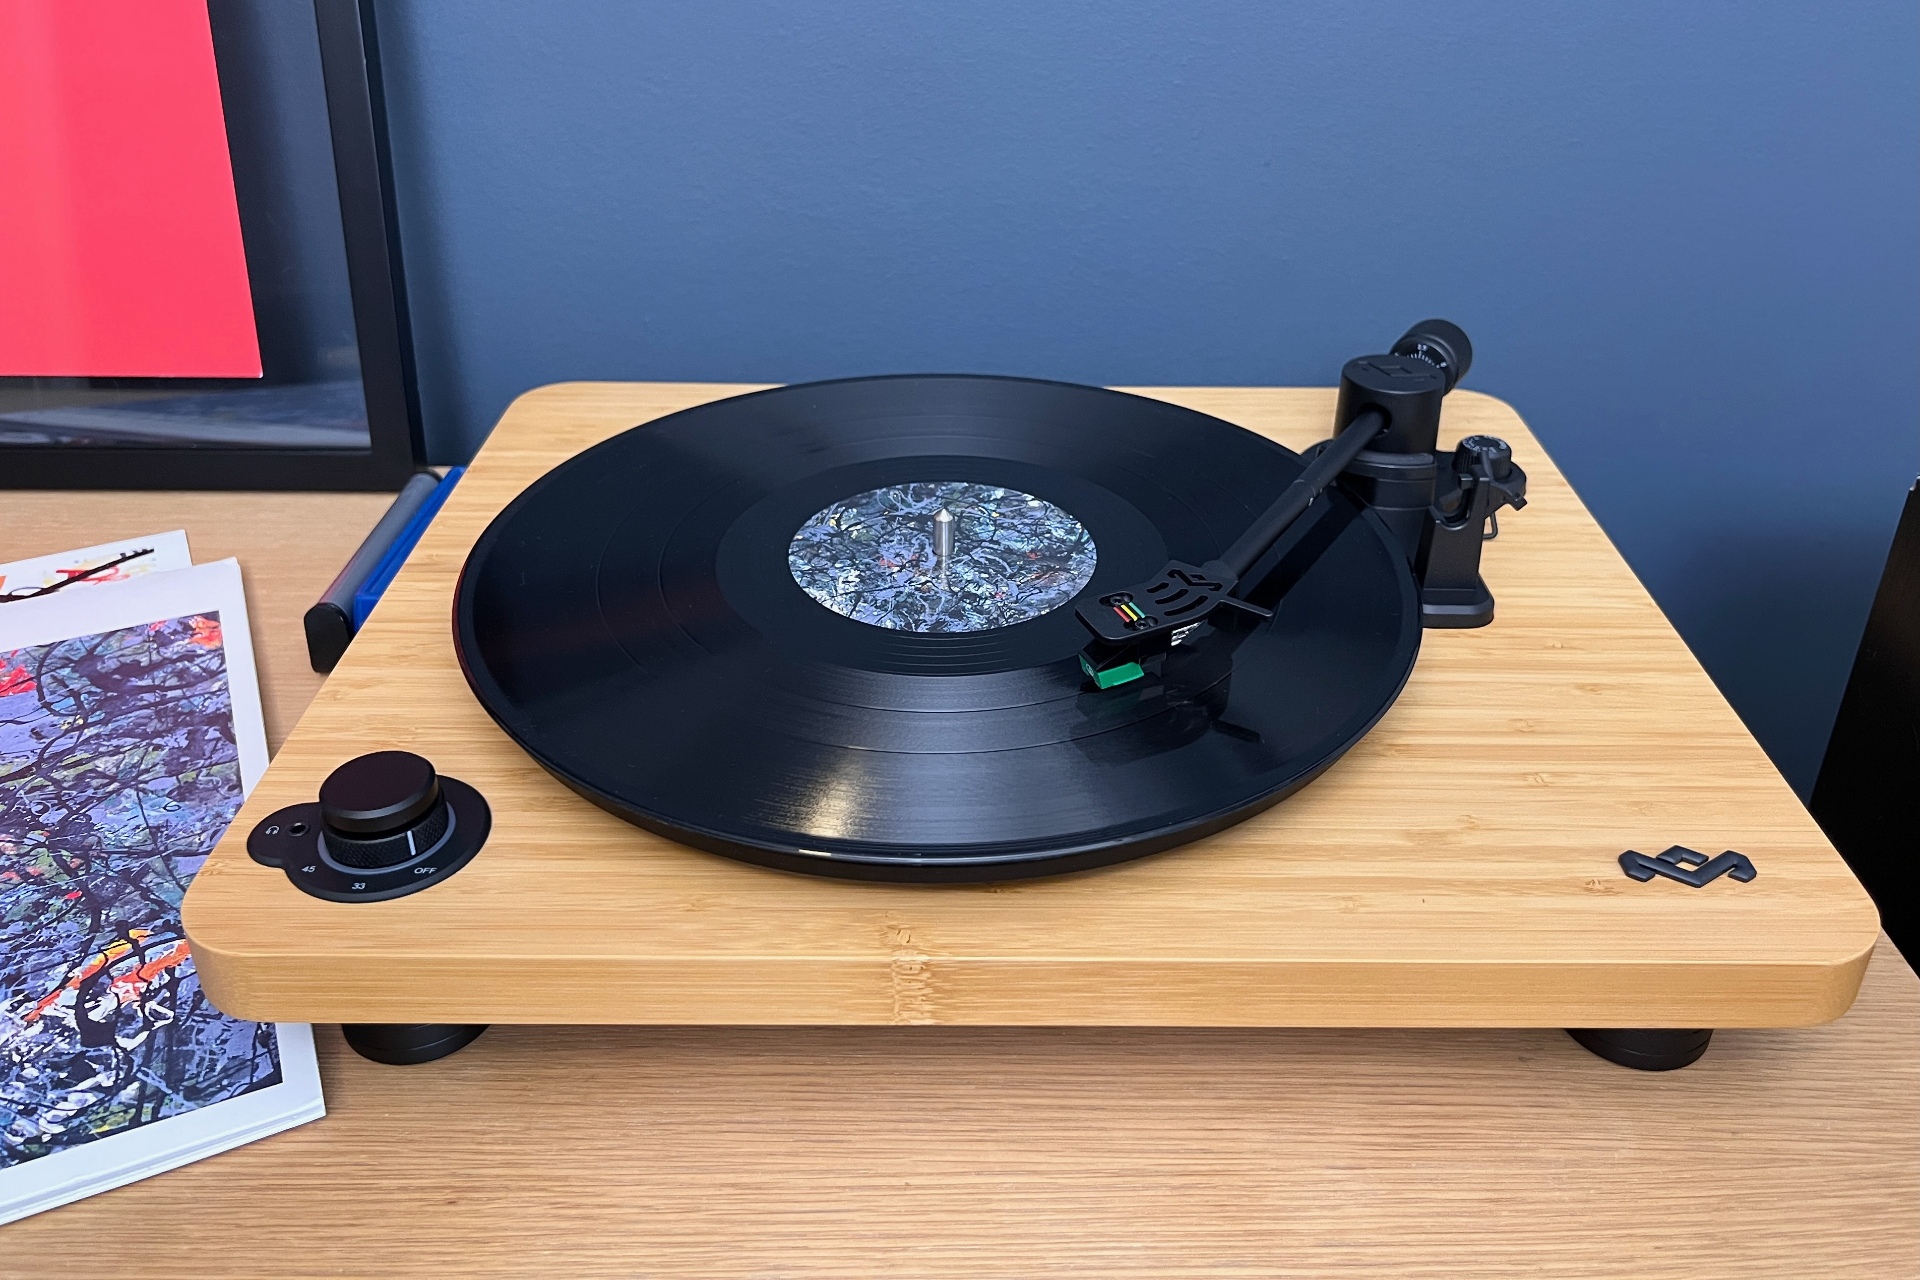 House of Marley Stir It Up Turntable Review